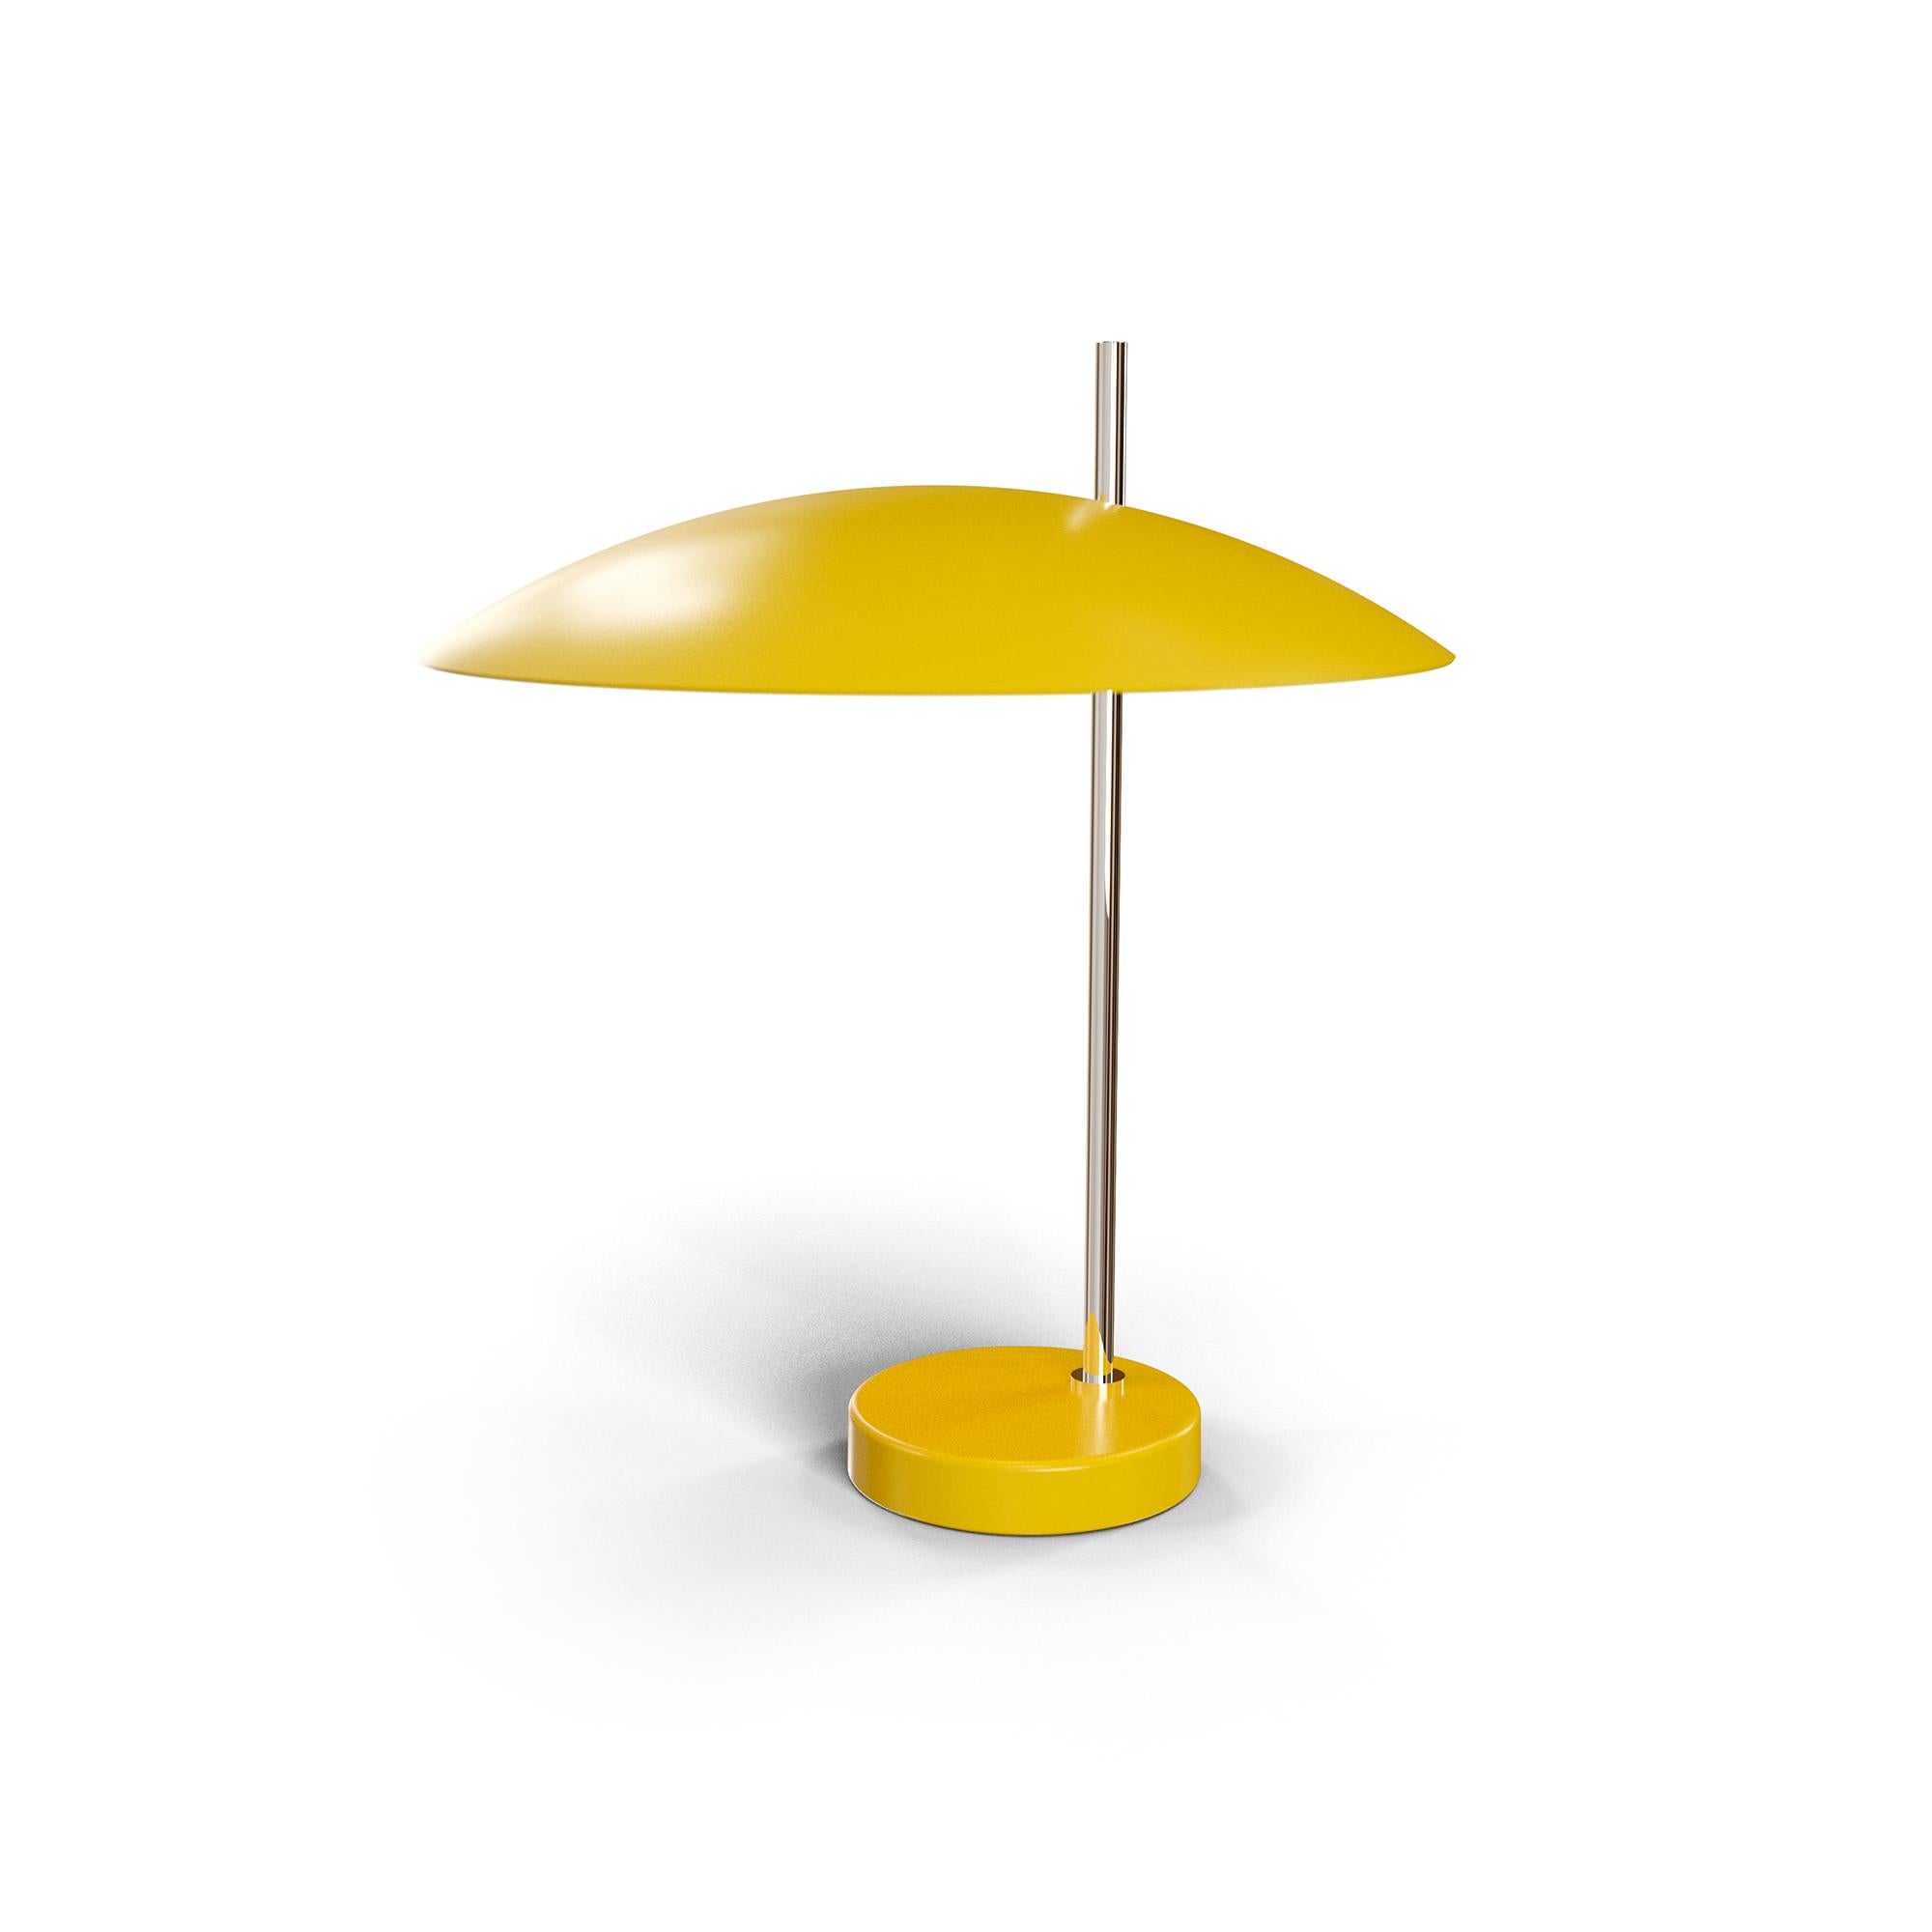 Chrome 1013 Table Lamp by Disderot
Limited Edition. 
Designed by Pierre Disderot.
Dimensions: Ø 34,1 x H 39,77 cm.
Materials: Chrome and yellow metal.

Delivered with authentication certificate. Made in France. Available in brushed brass, golden